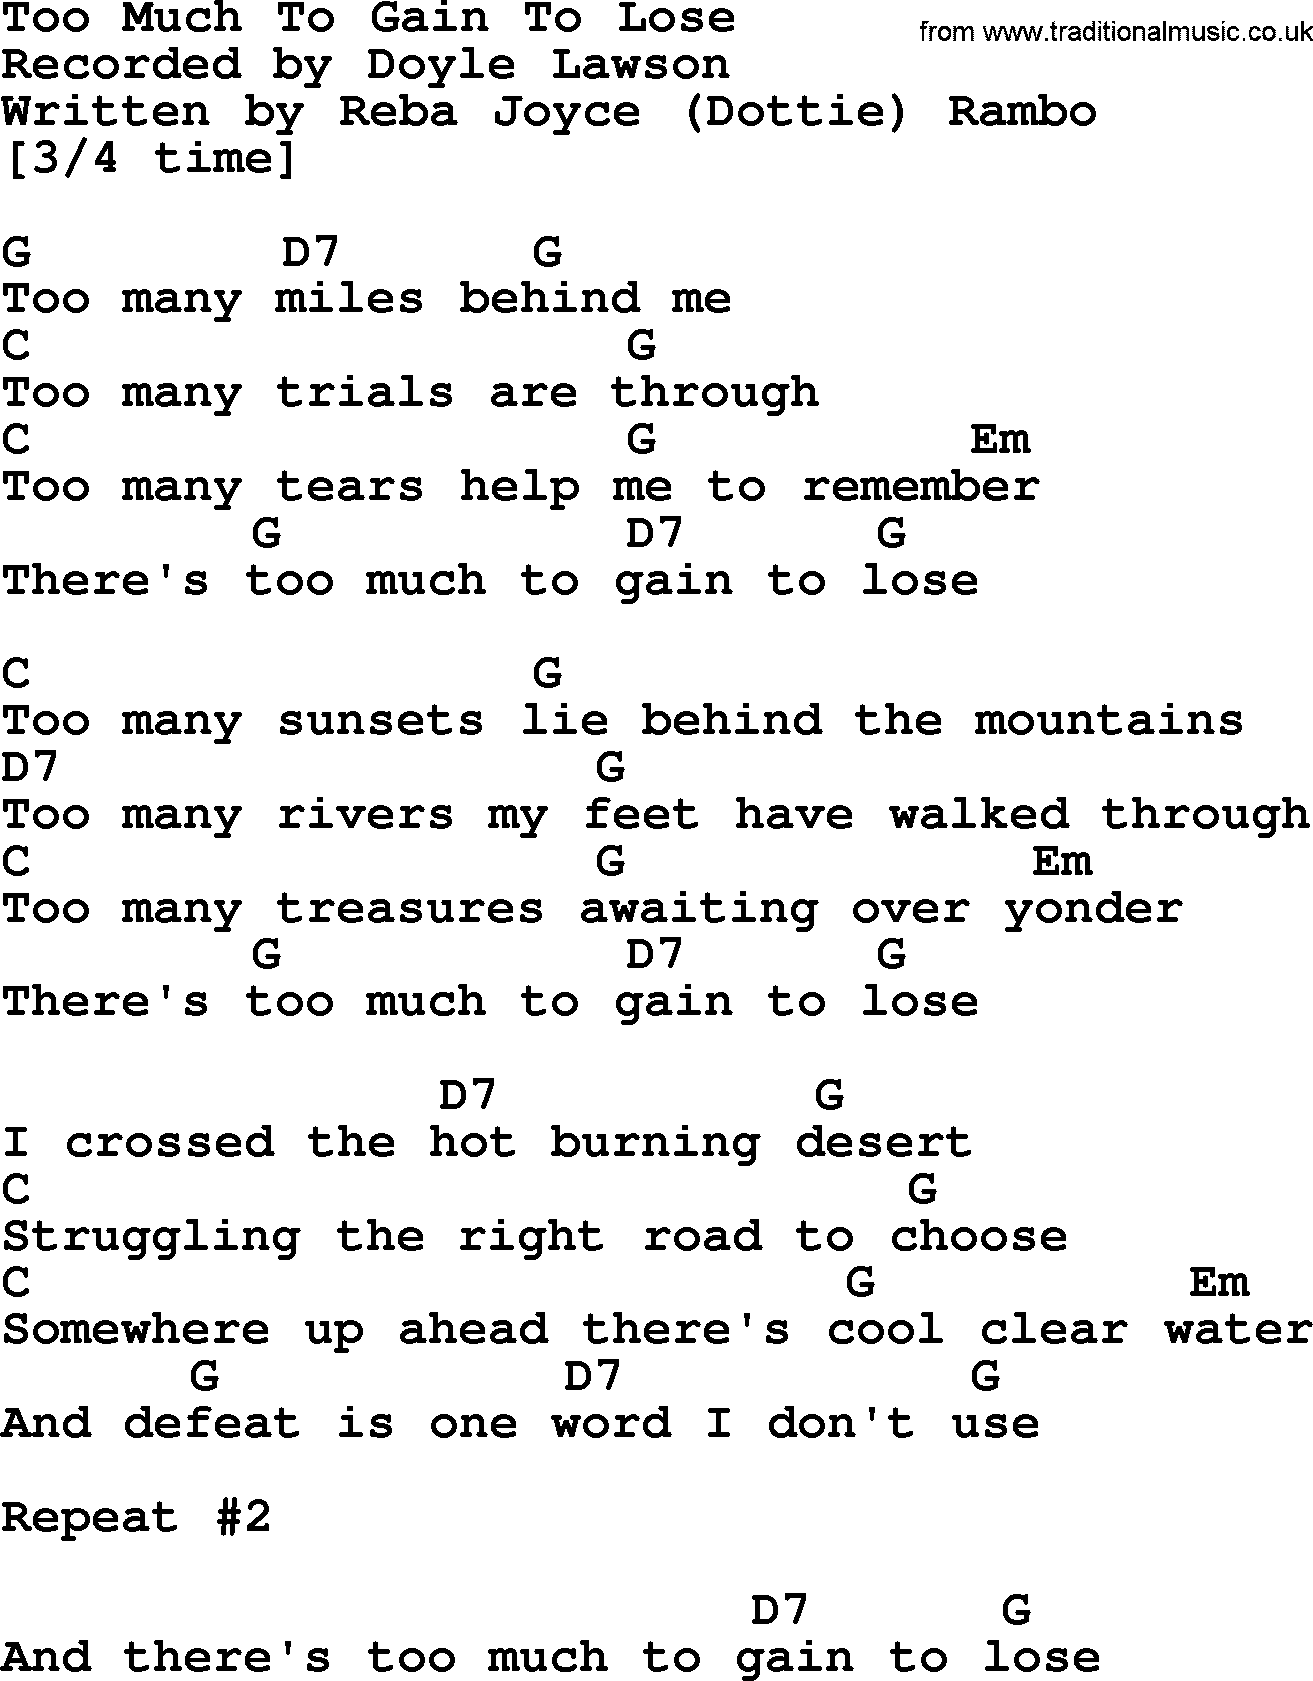 Bluegrass song: Too Much To Gain To Lose, lyrics and chords